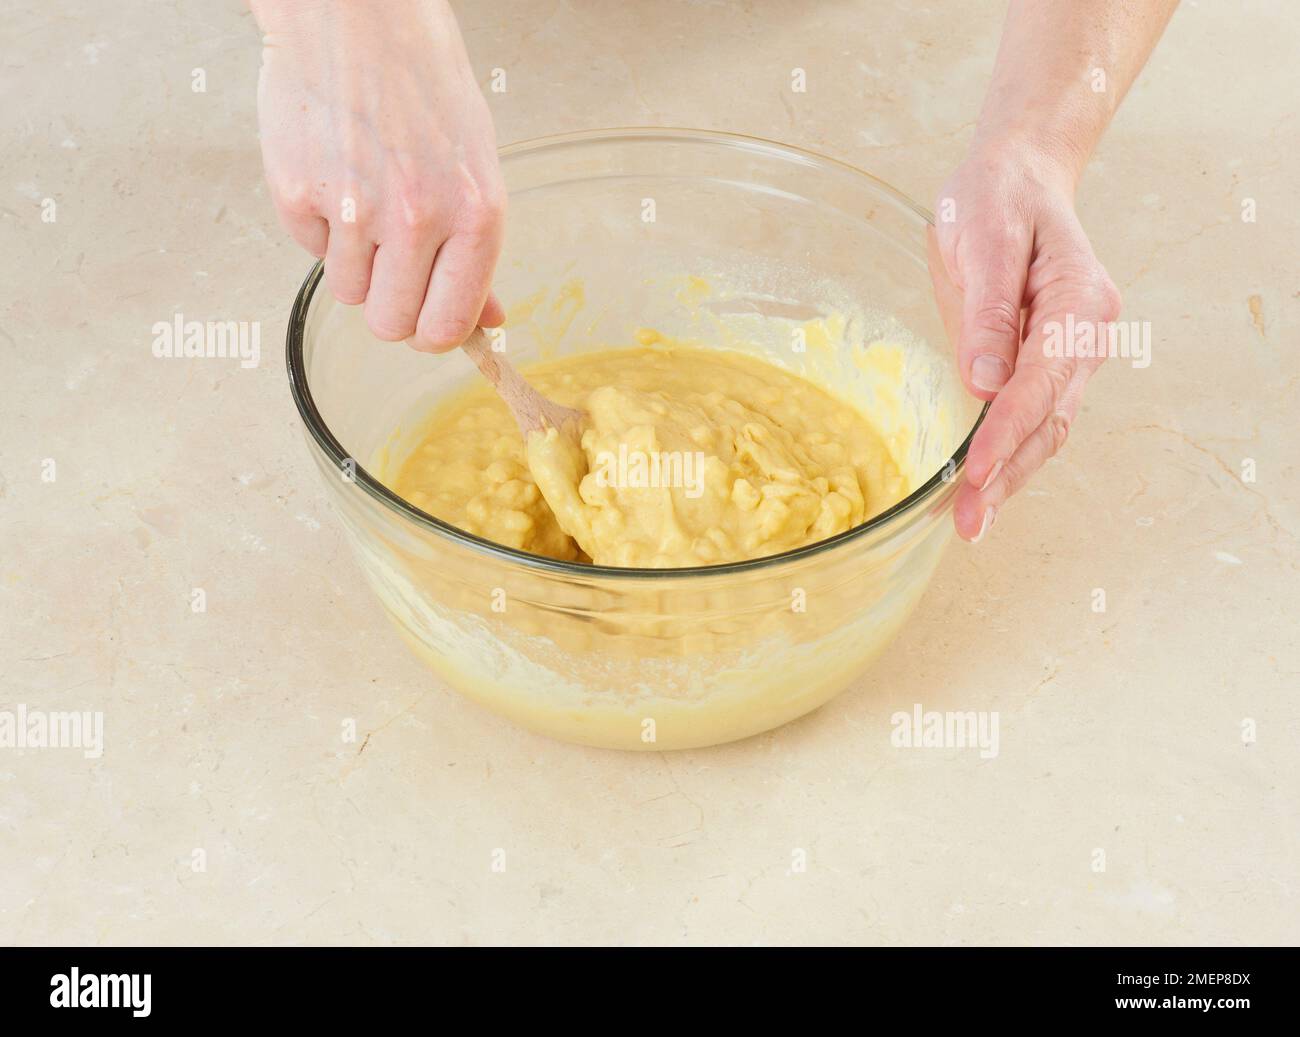 Mixing together ingredients of hot-water crust pastry dough, using wooden  spoon Stock Photo - Alamy